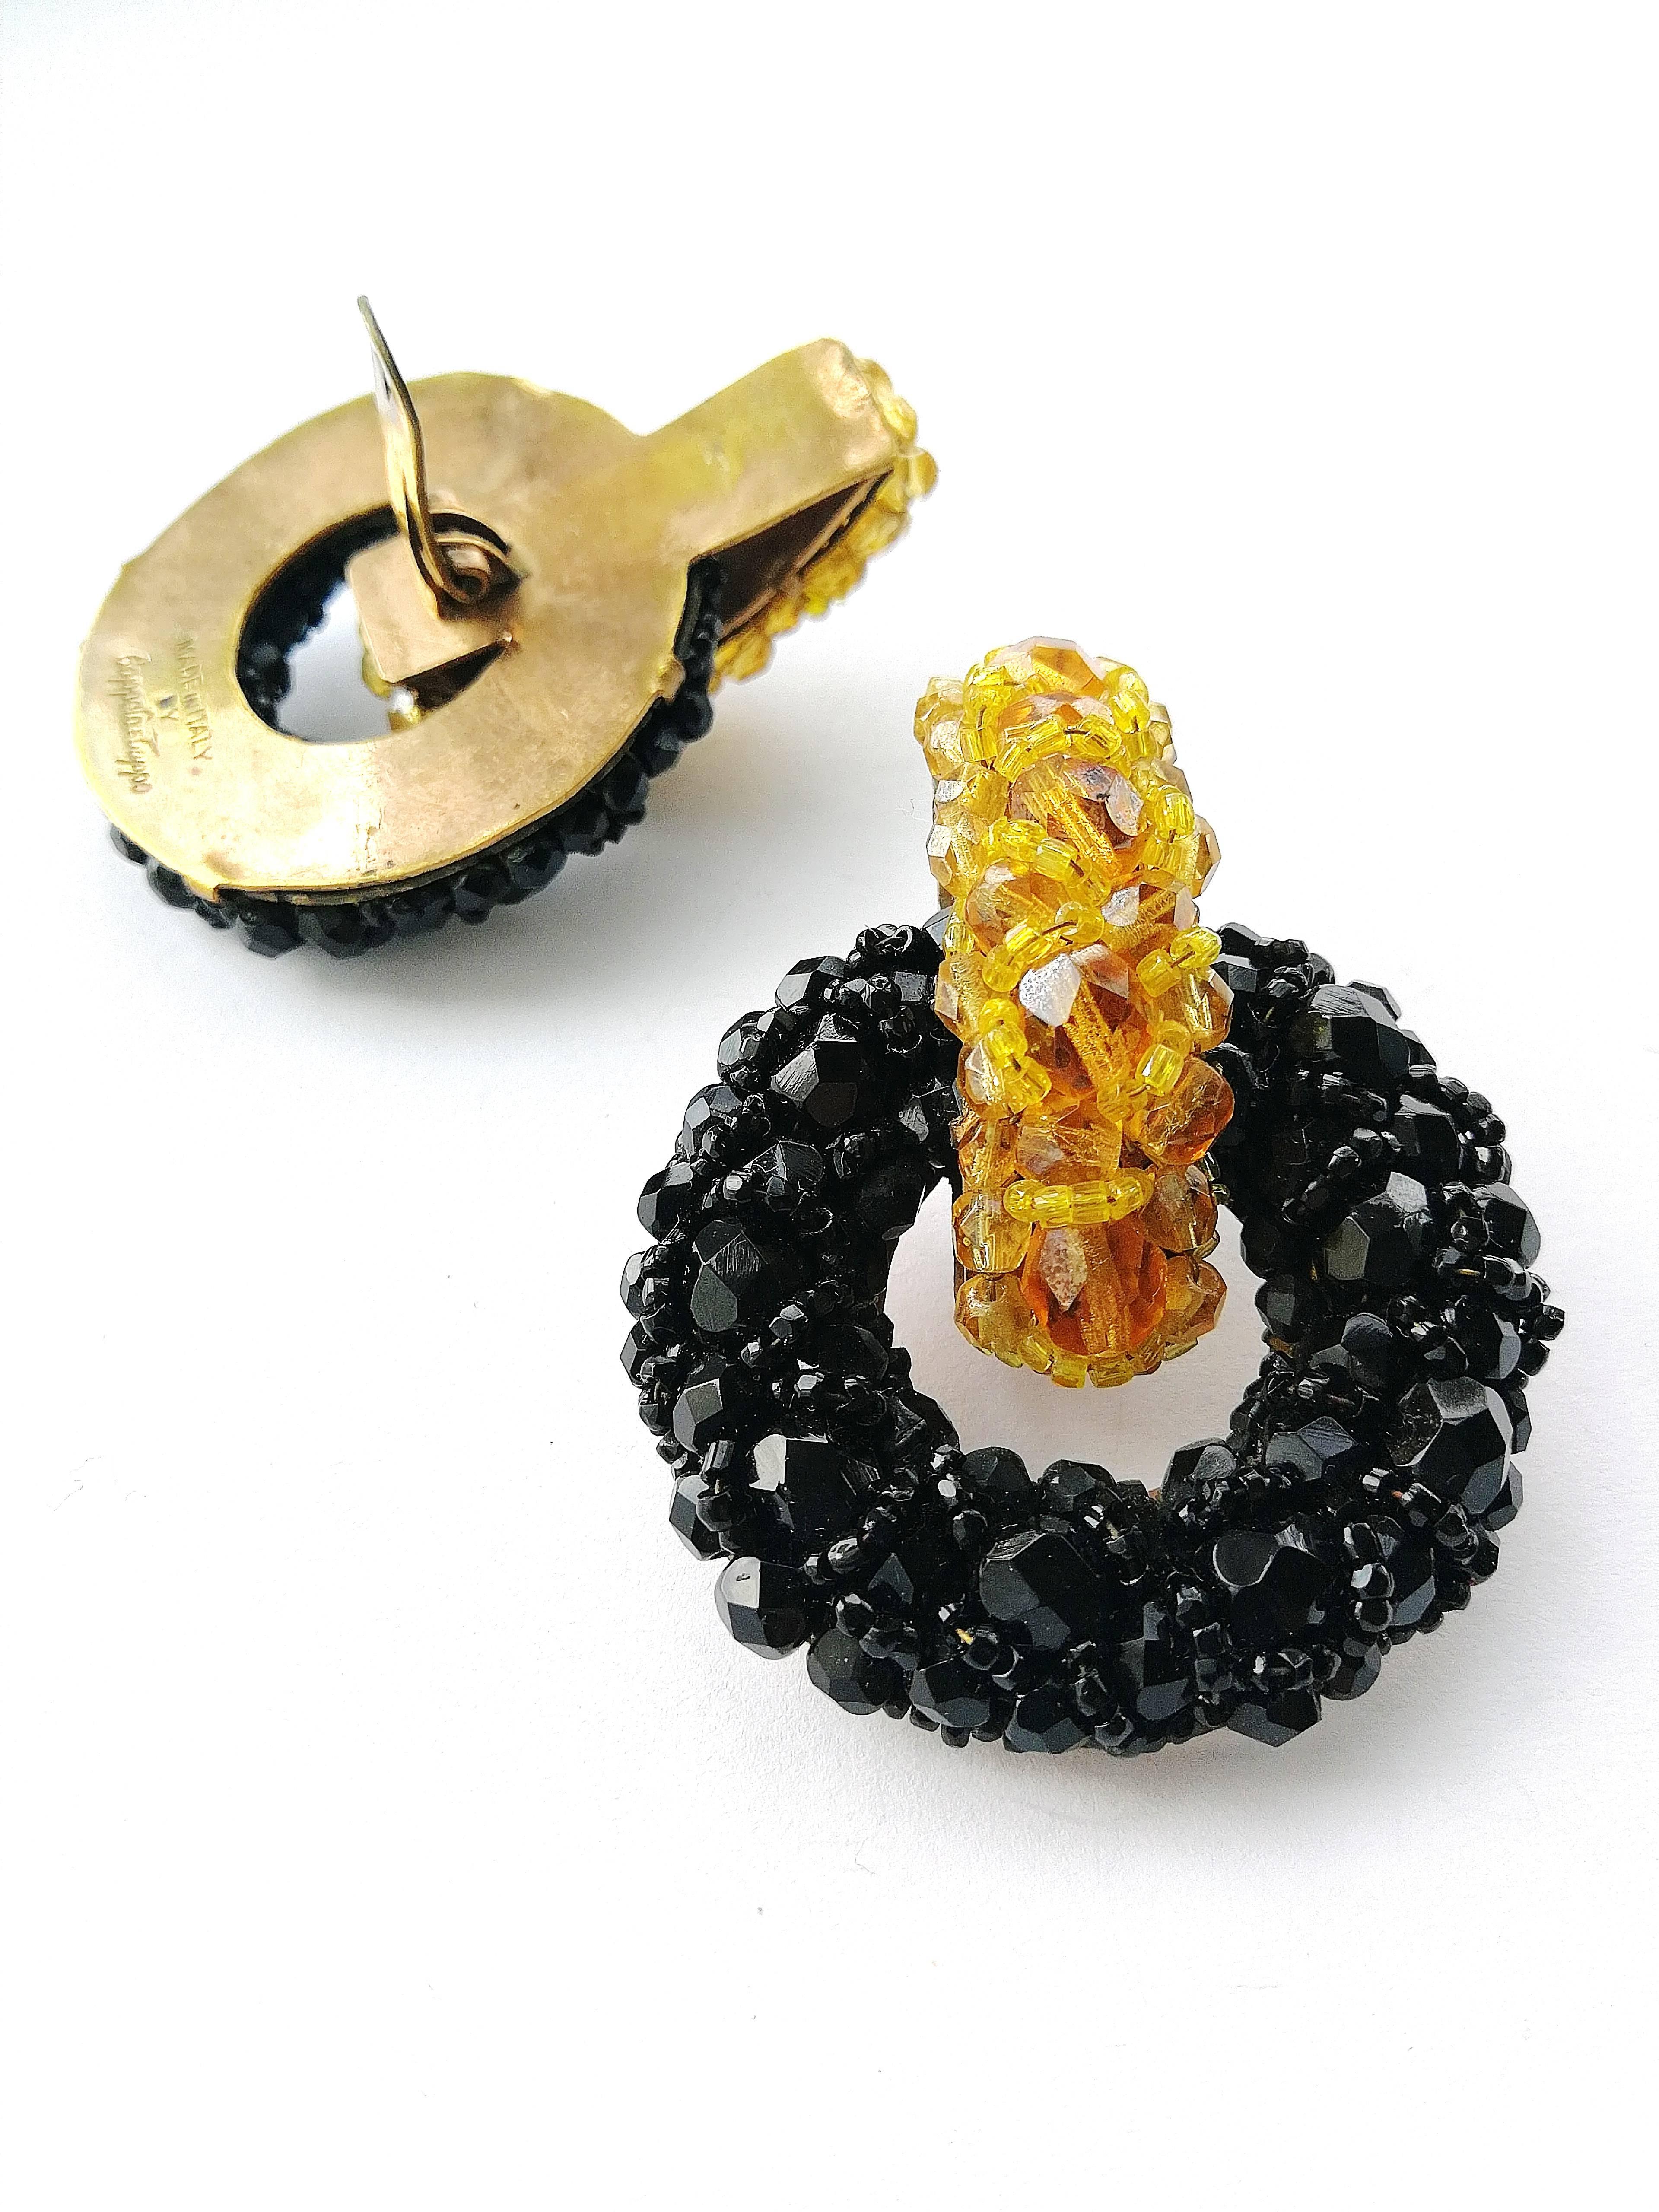 Black and Topaz Faceted Bead Earrings, Coppola e Toppo, Italy, Early 1950s 5